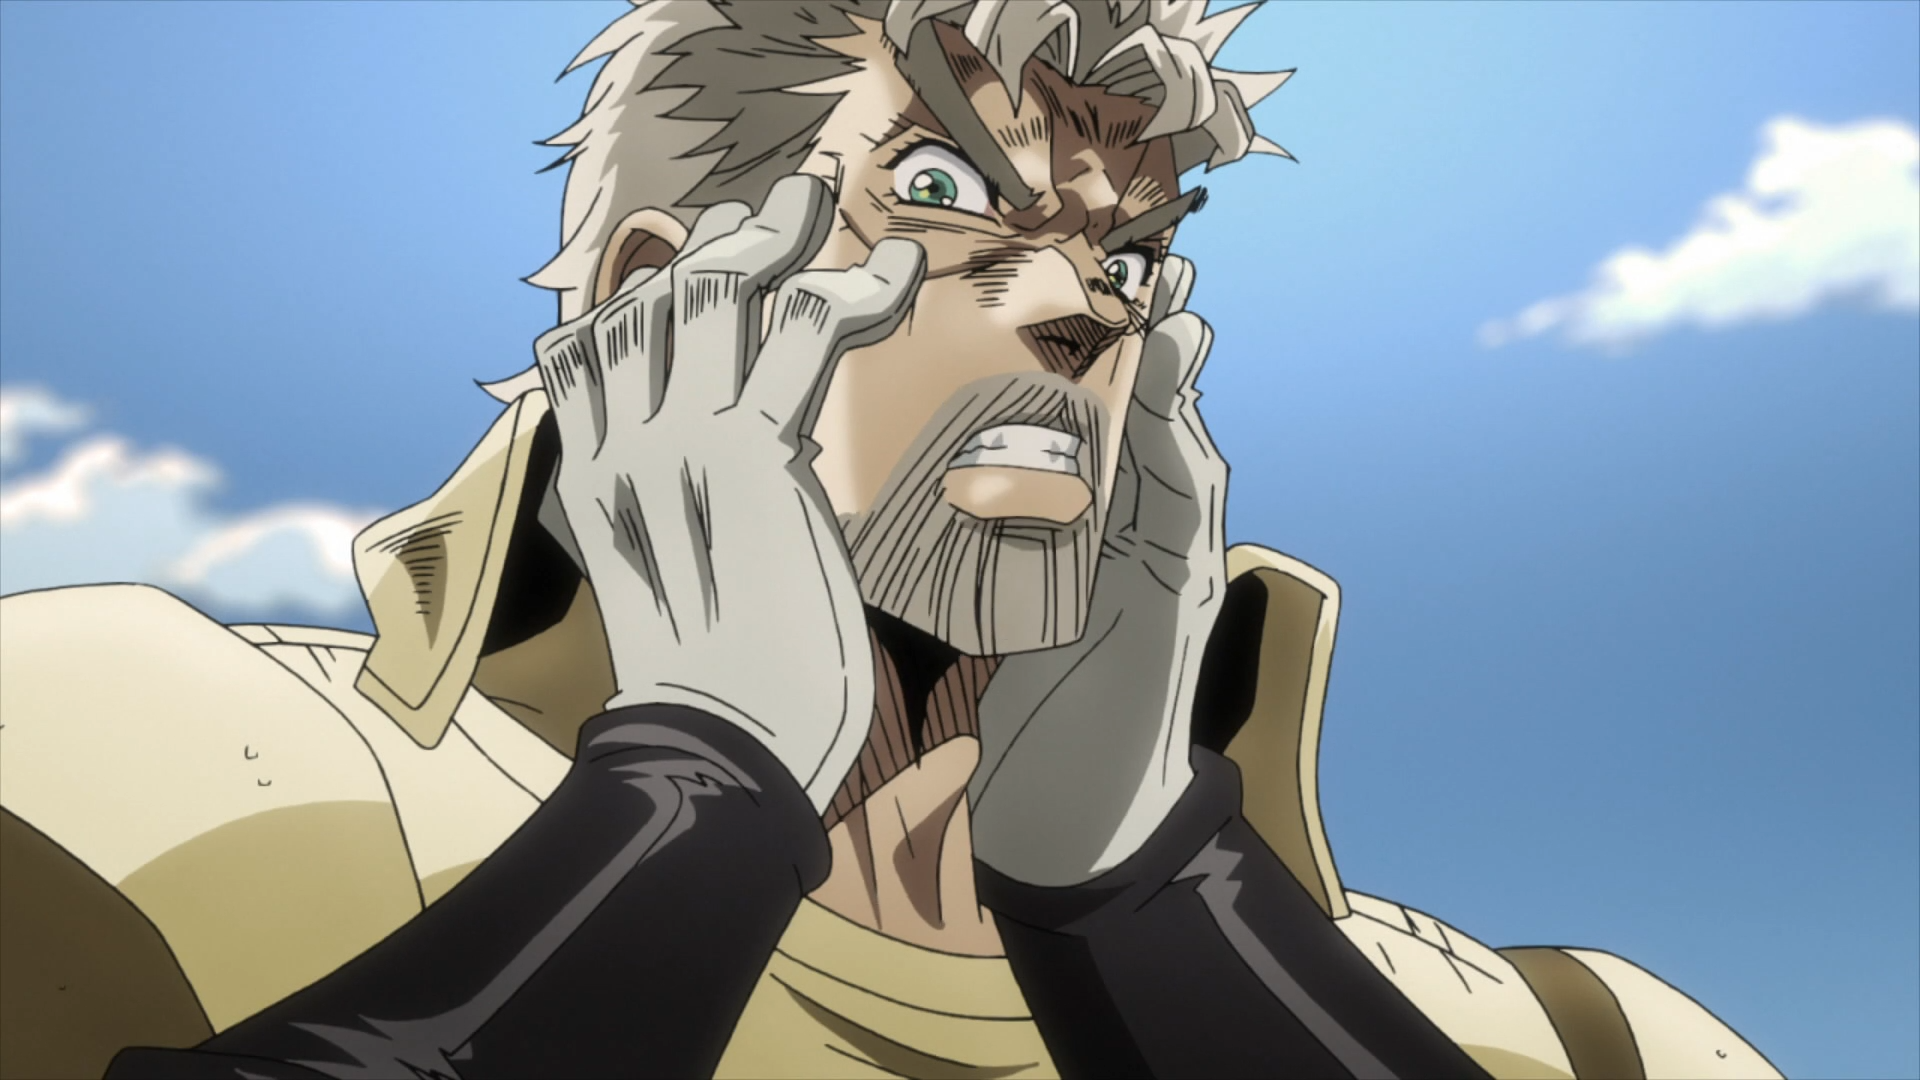 FEATURE: Where to Watch JoJo's Bizarre Adventure for Free